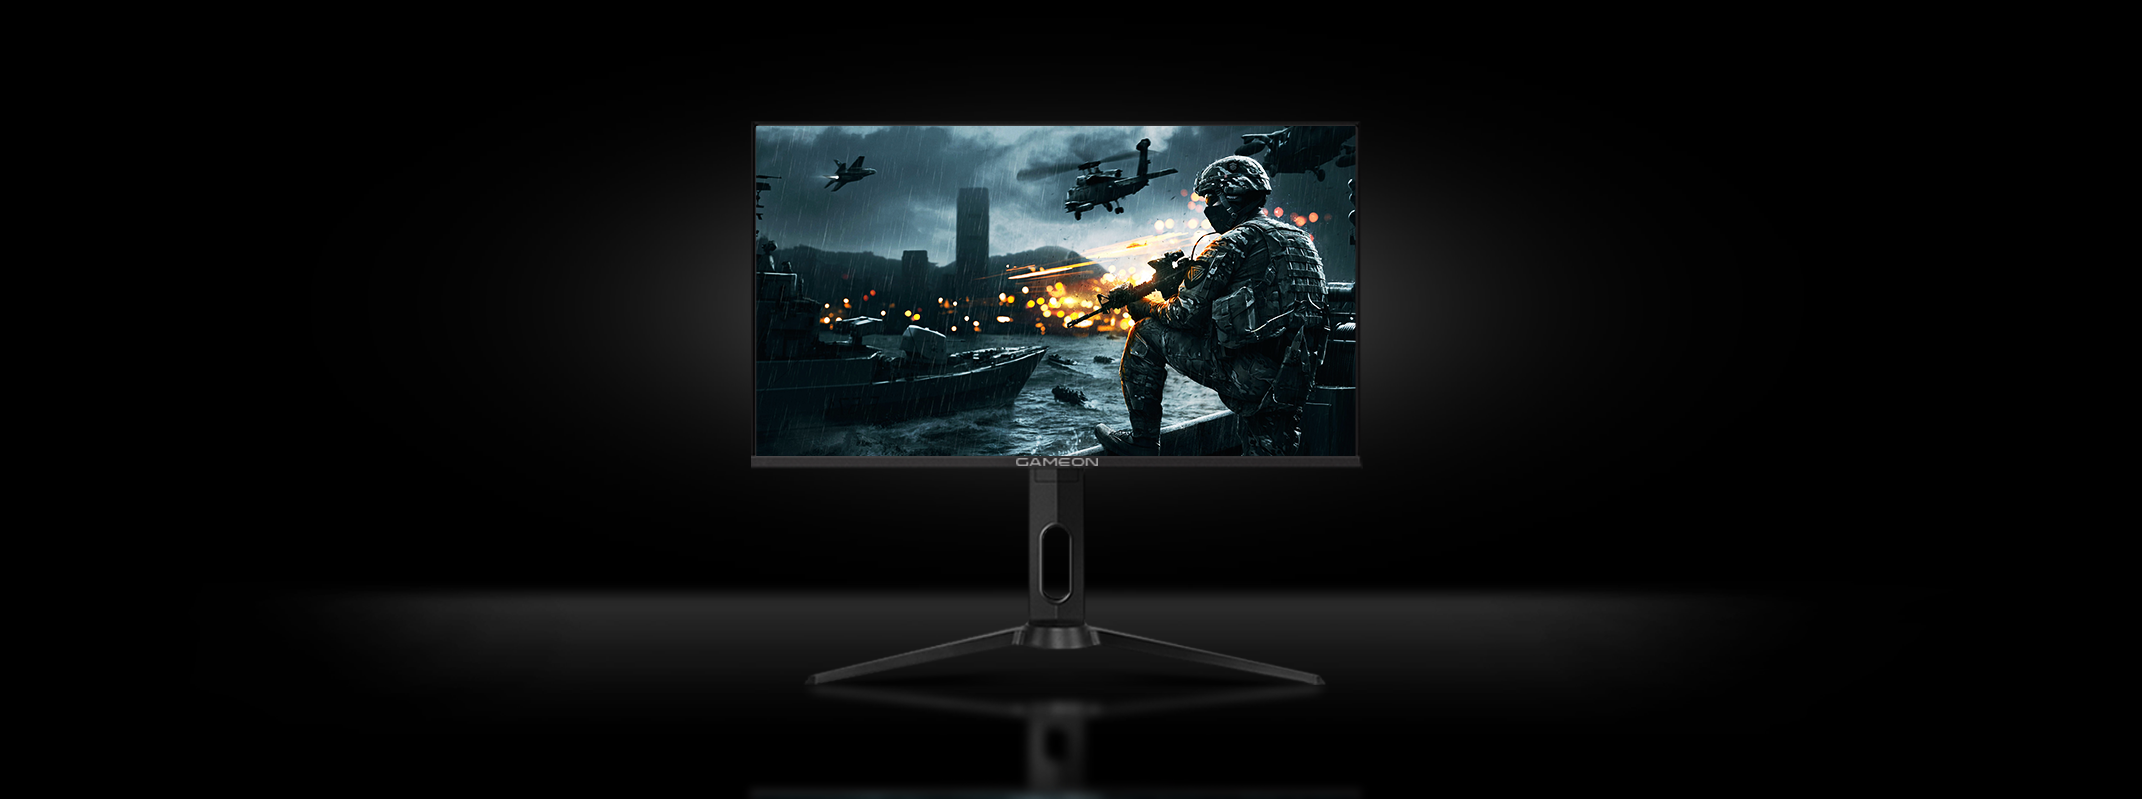 GAMEON GO-FHD27IPS165 27" FHD, 165Hz, IPS Gaming Monitor With G-Sync & Free Sync